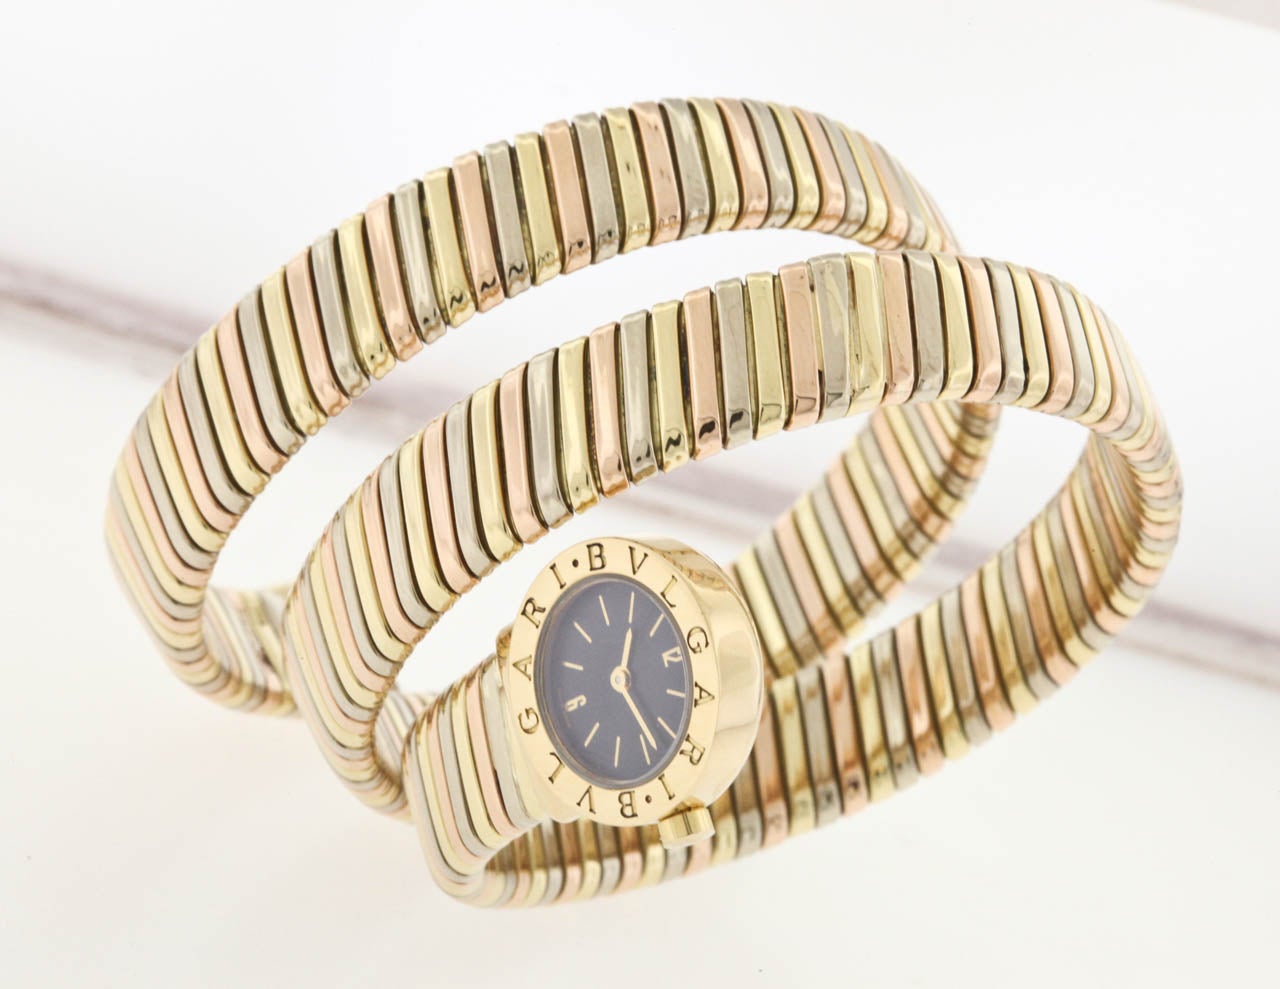 18k three-color rose, yellow and white gold Bulgari lady's Tubogas bracelet watch, circa 1990s. A wraparound gold bracelet with 19mm wristwatch case, snap back, quartz movement, black dial with applied hour indexes, Arabic 12 and 6, sapphire